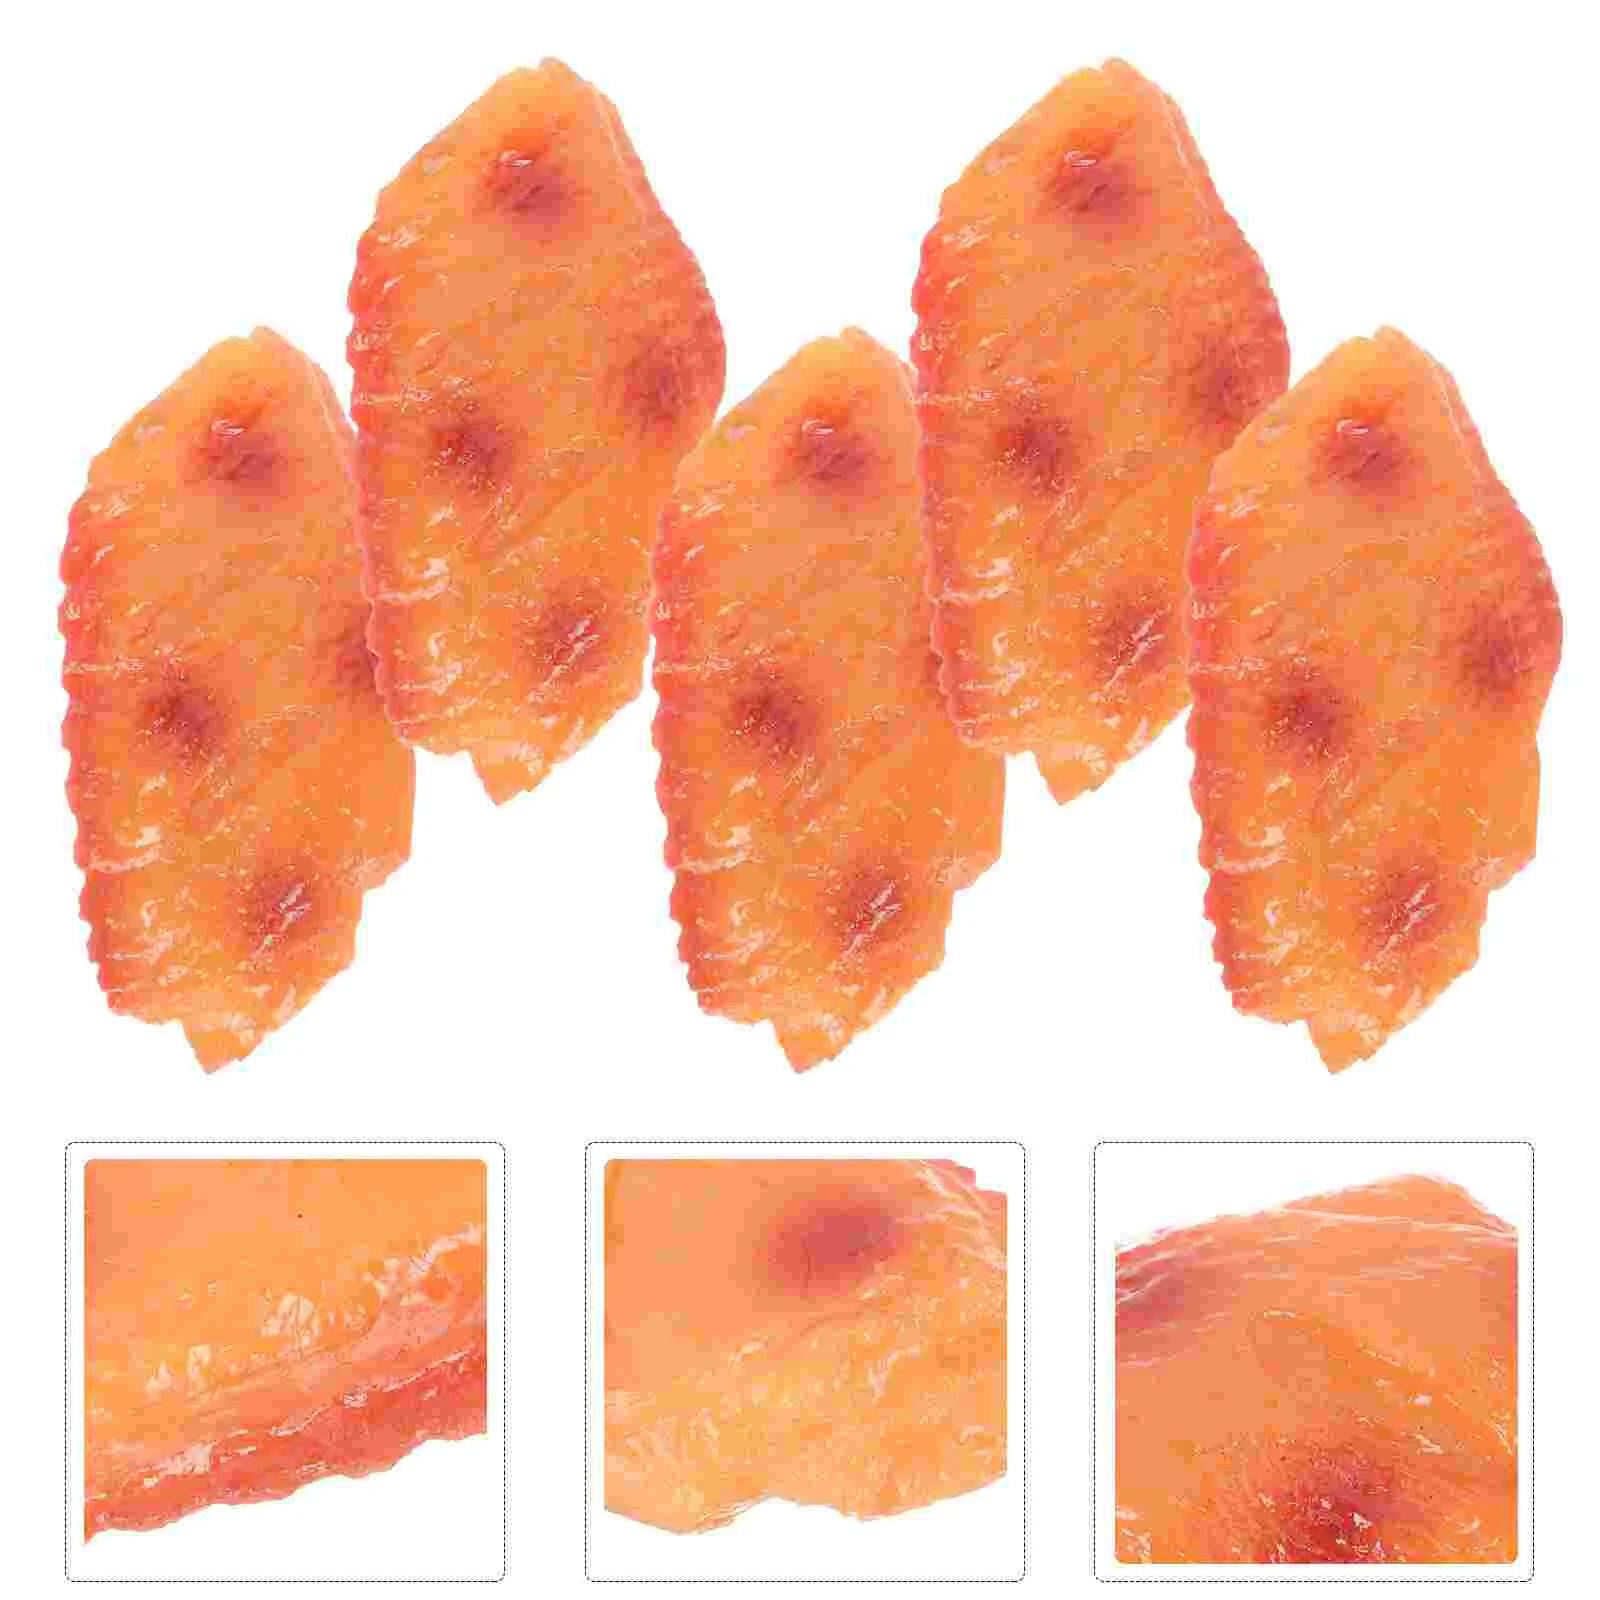 5 Pcs Fake Chicken Wing Simulated Food Decor Fake Fried Chicken Play Food Toys Artificial Chicken Wing